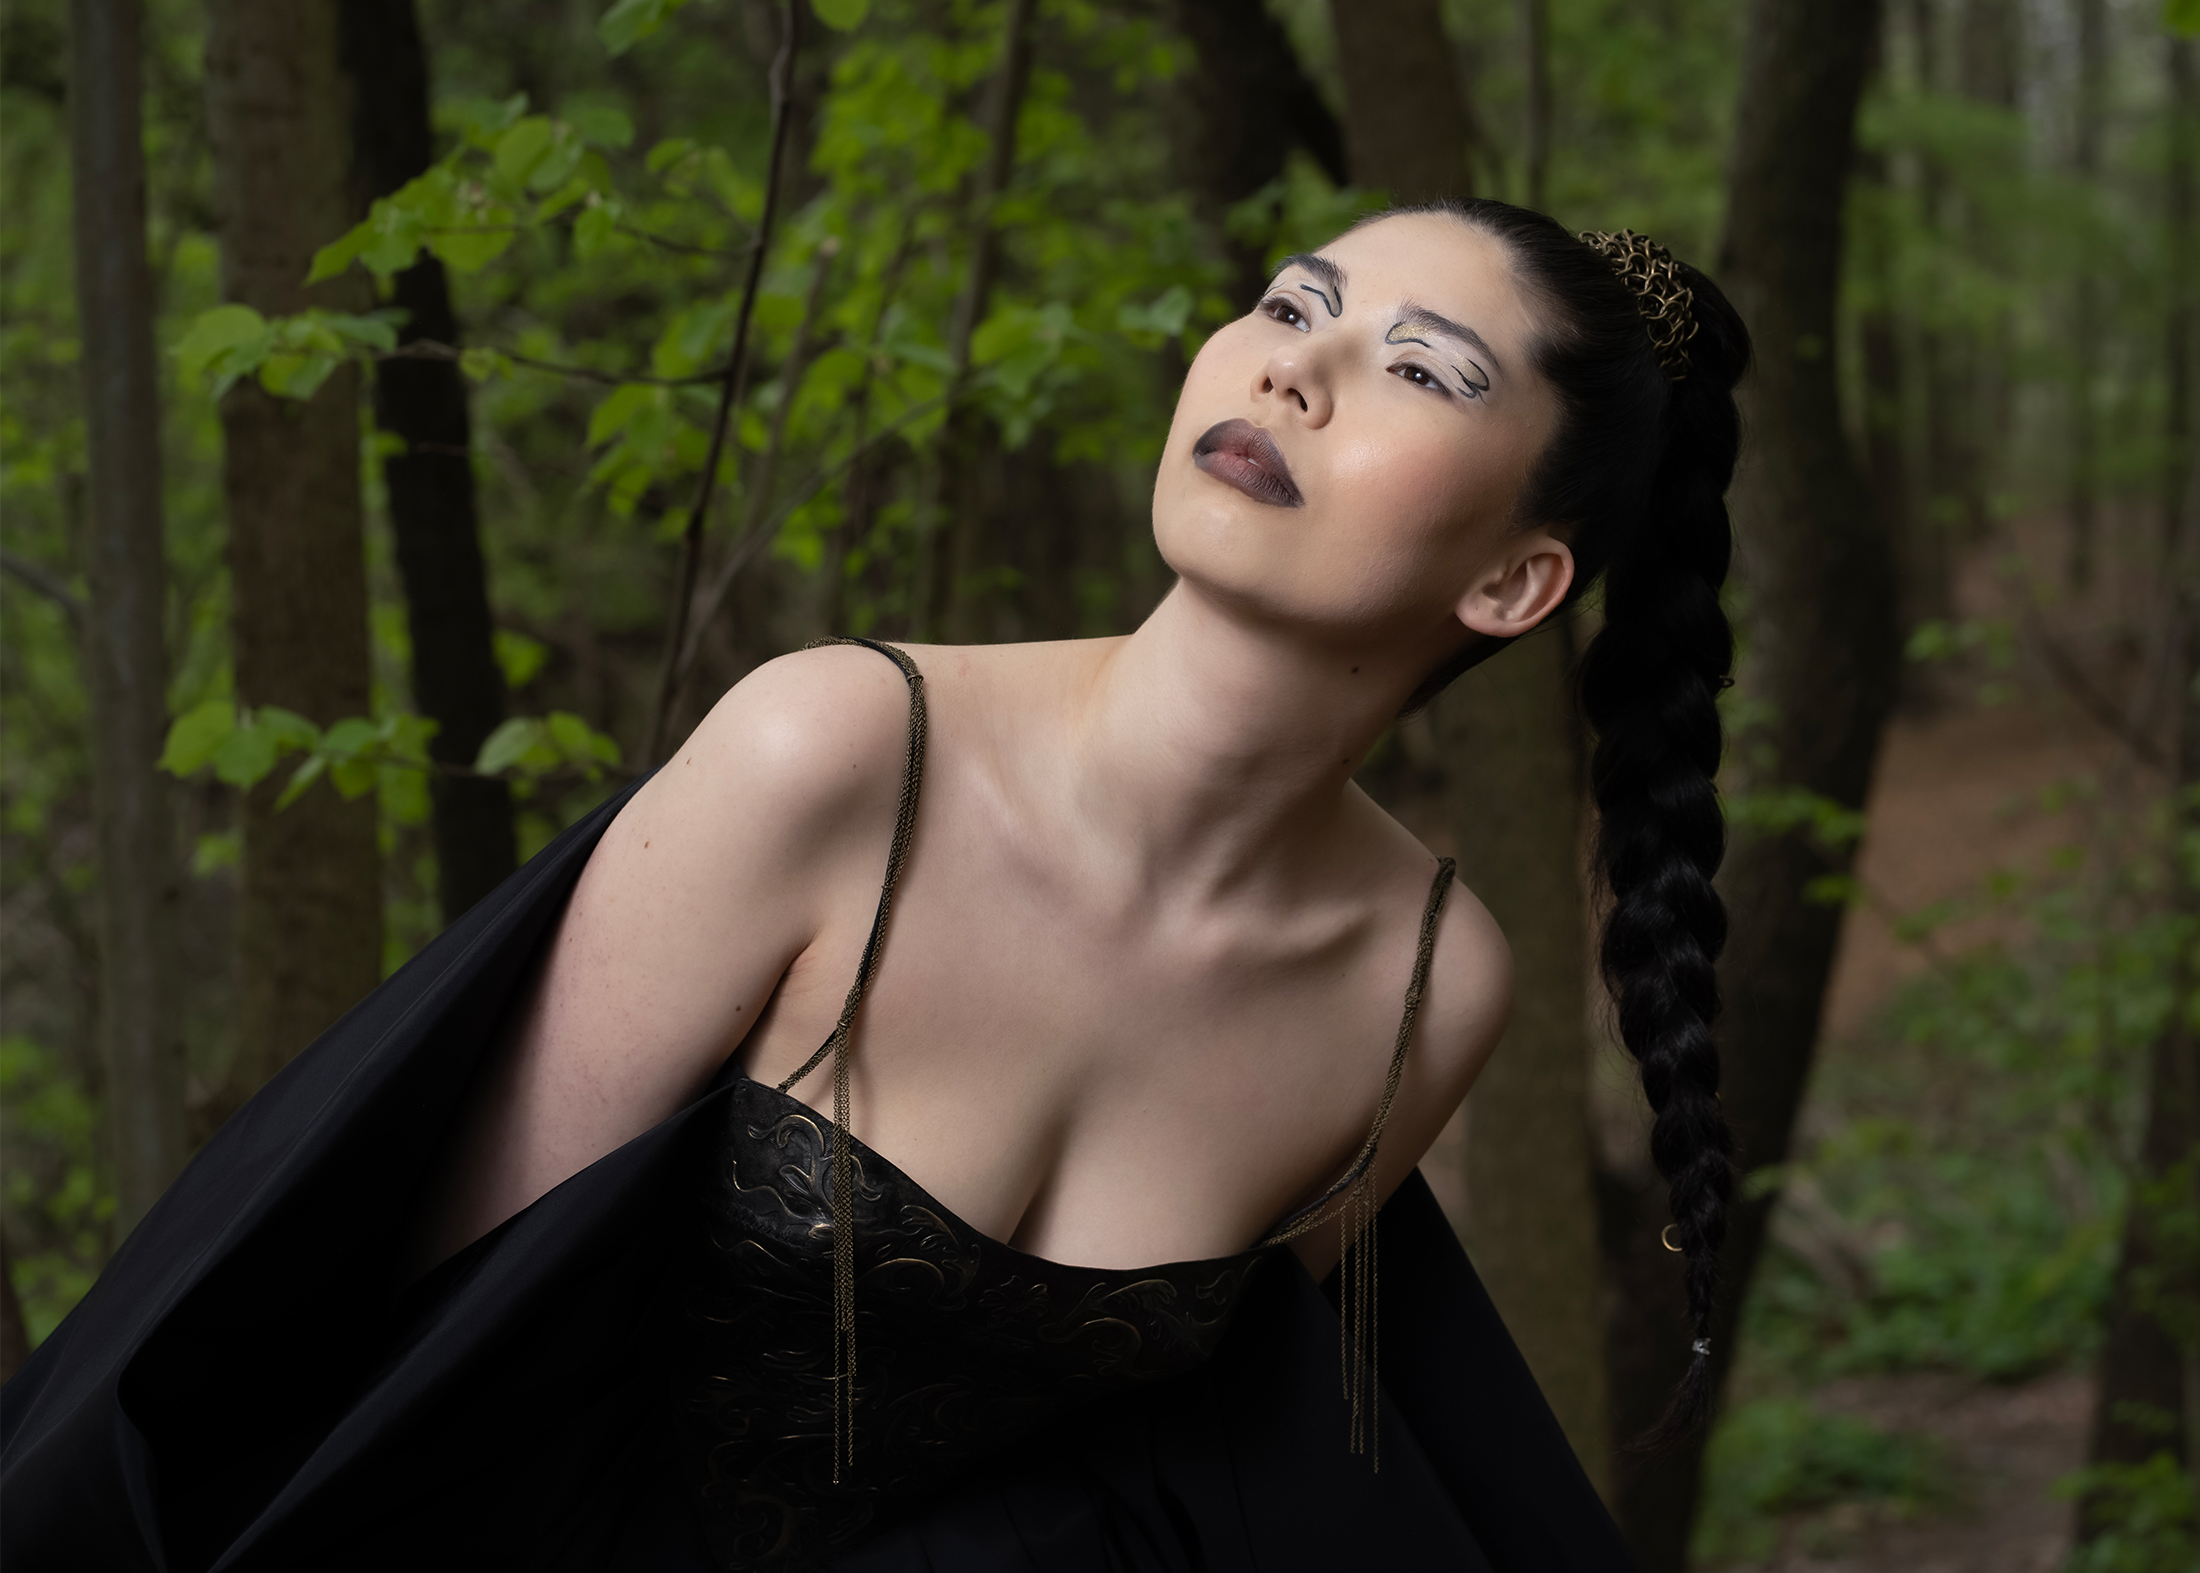 A woman in a black-and-gold dress in the forest is the focal point of this image, exuding an air of mystery and allure. The camera zooms in on various aspects of her appearance, capturing her intricate braid. Her makeup is dark and dramatic, adding to the enigmatic aura that surrounds her. The overall effect is one of sophistication and elegance, while capturing the details of the delicate hand-painted/leather-tooling bodice with its delicate chains as straps. The overall ambiance gives a strong woman/warrior vibe, one of a women exuding an air of quiet confidence, resilience, and bravery.